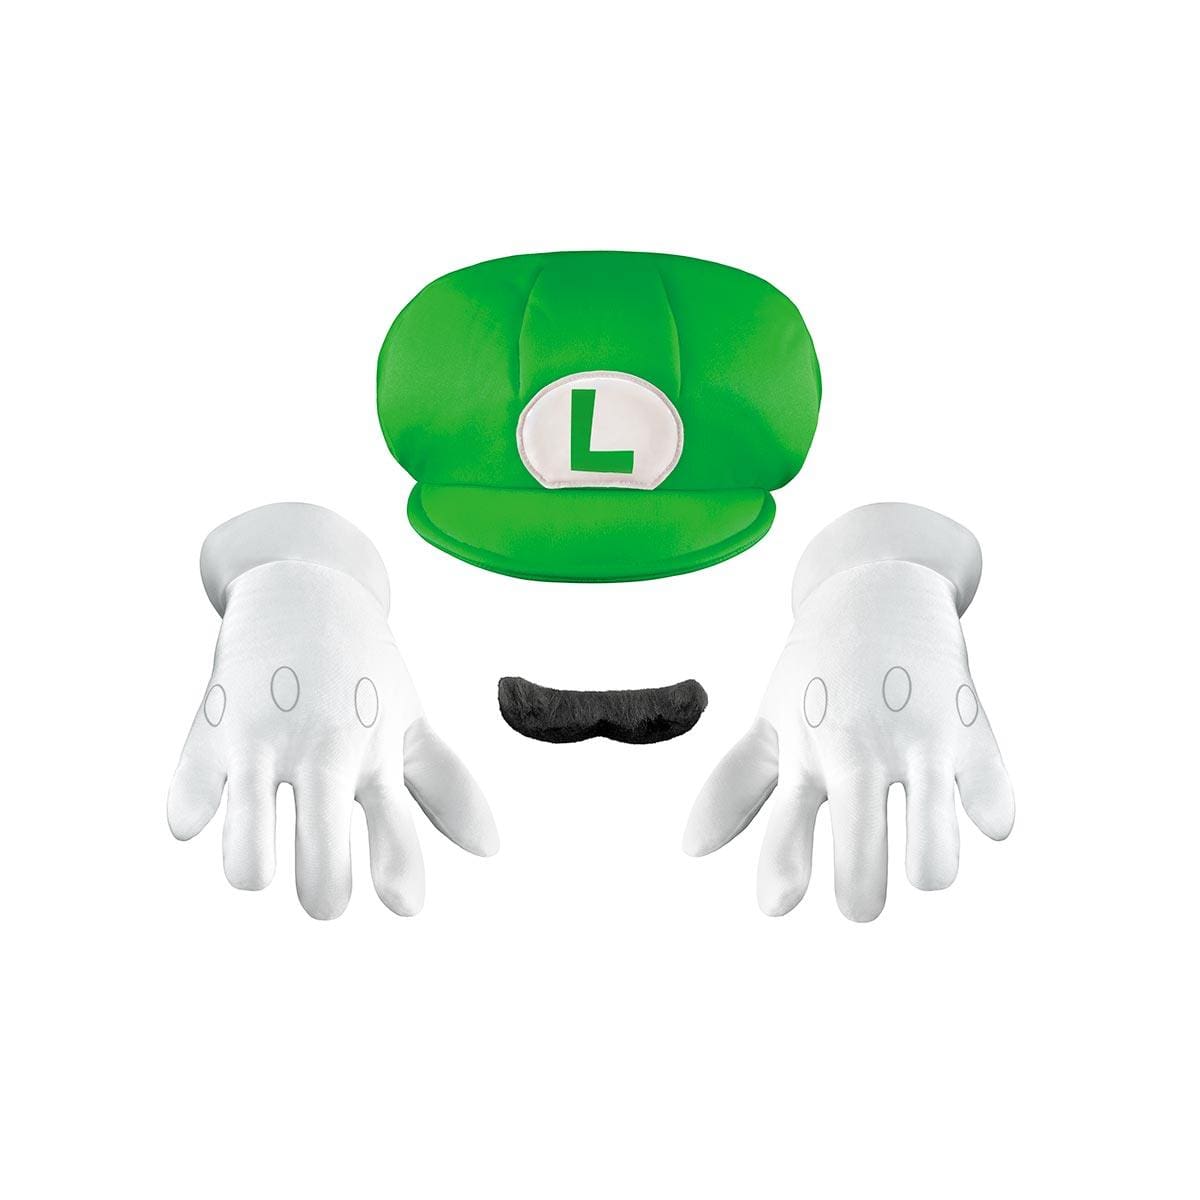 Buy Costume Accessories Luigi accessory kit for kids, Super Mario Bros. sold at Party Expert